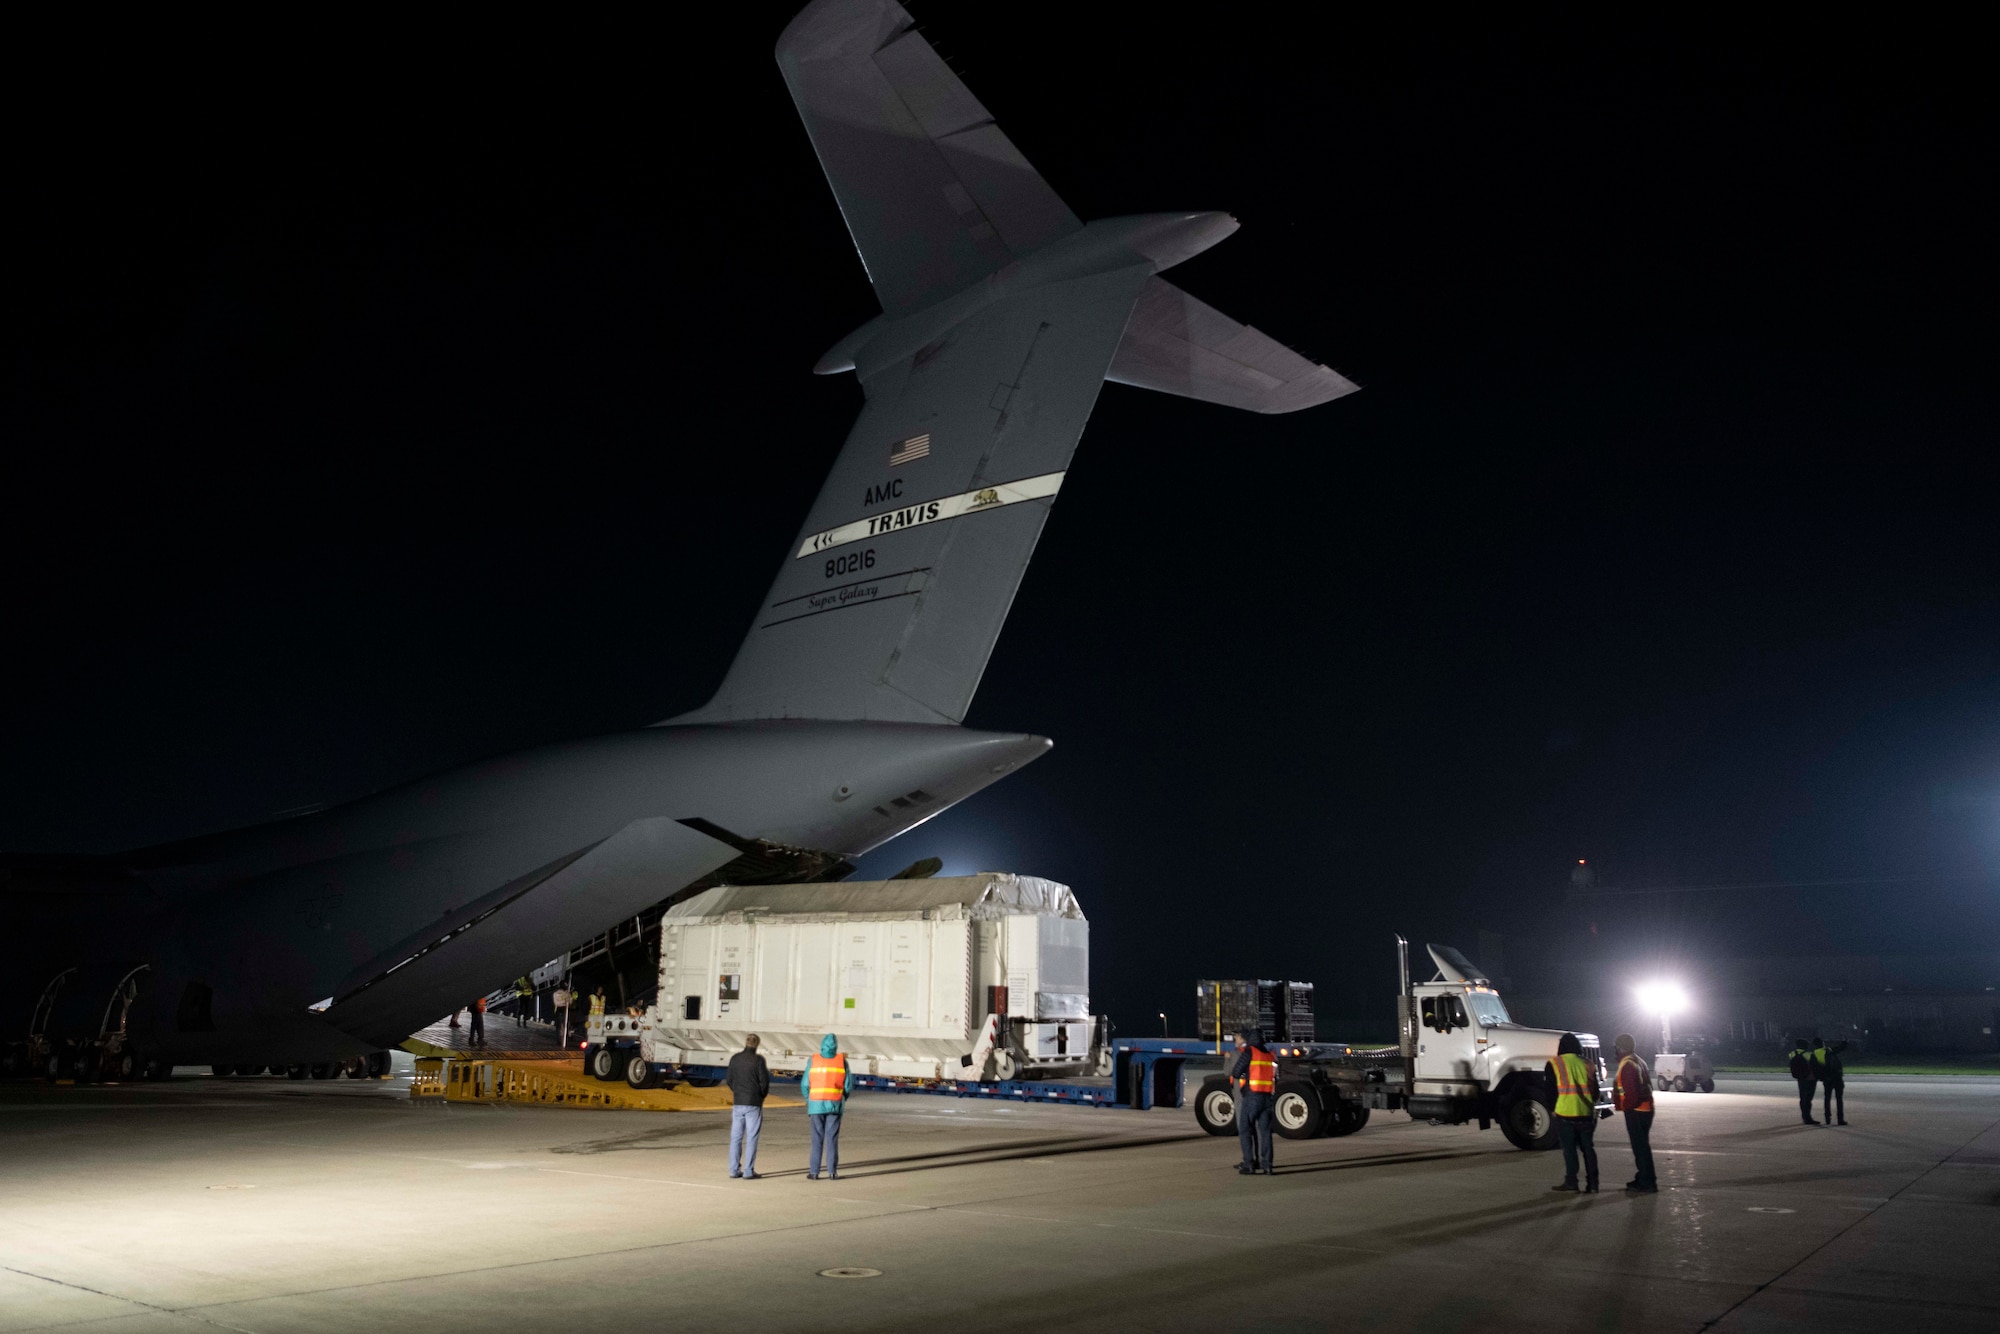 People move a satellite attached to a semi truck out of the cargo hold of a large aircraft